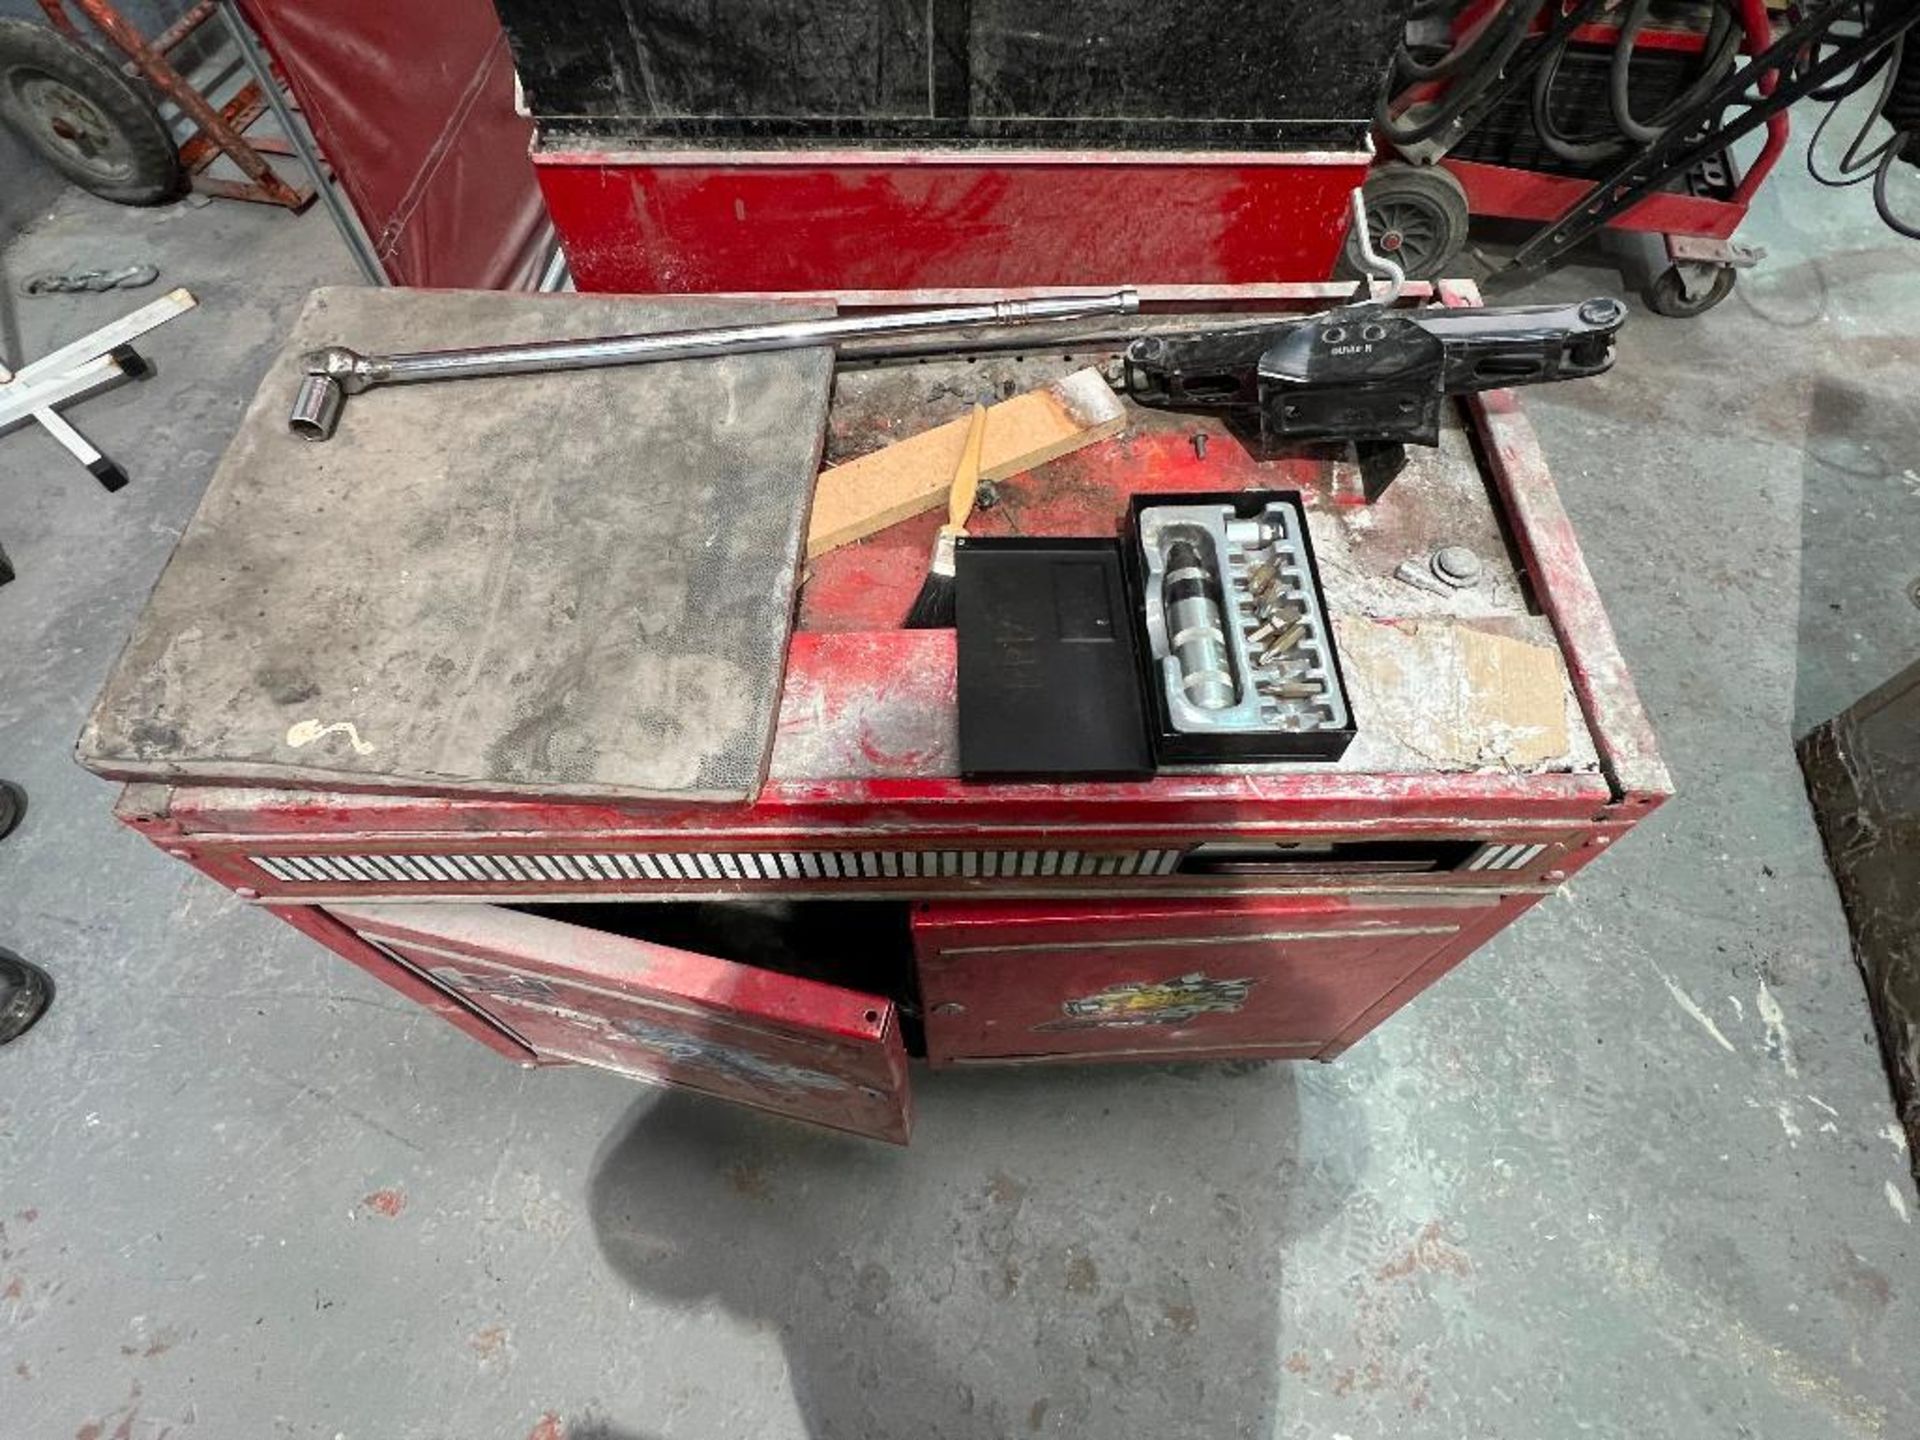 Mobile Tool Chest Comprising 3 Tool Boxes including contents as shown from Brands including Snap-On - Image 15 of 17